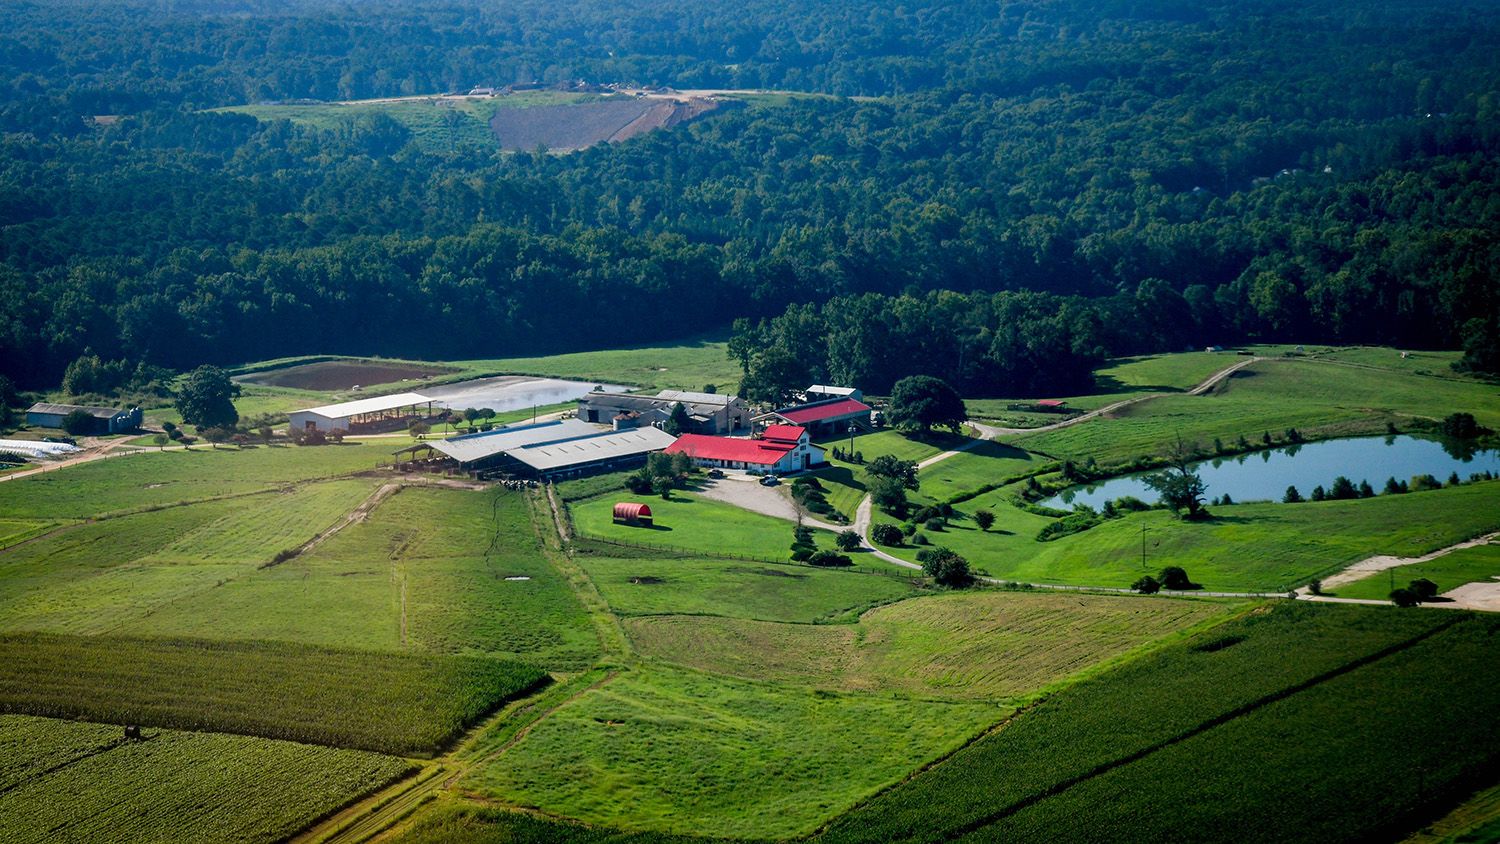 drone photo of farm fields, facilities, and a pond